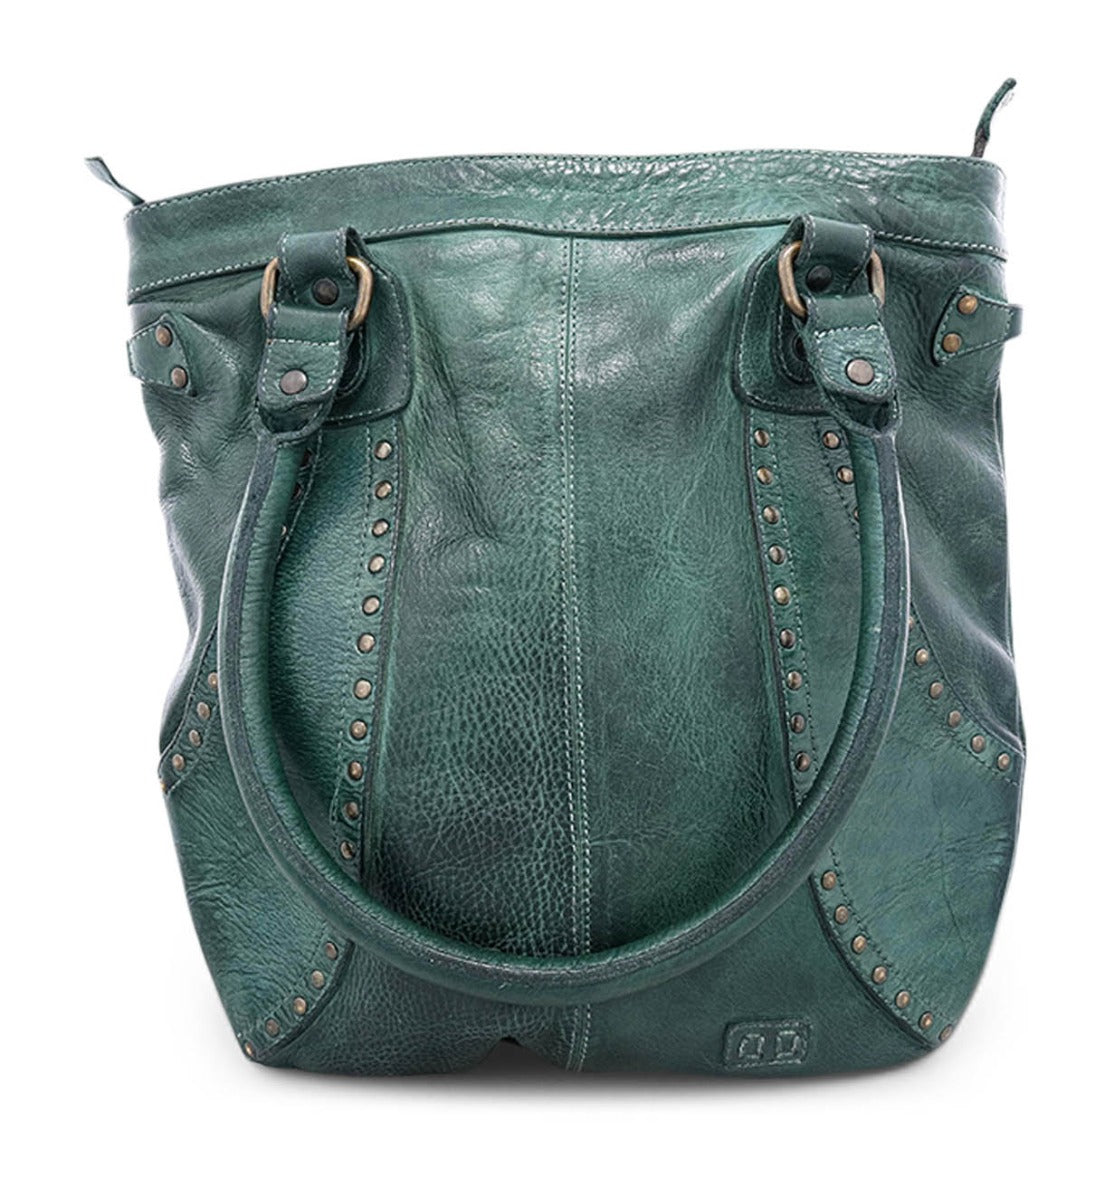 A Bed Stu Gala green leather tote bag with rivets.